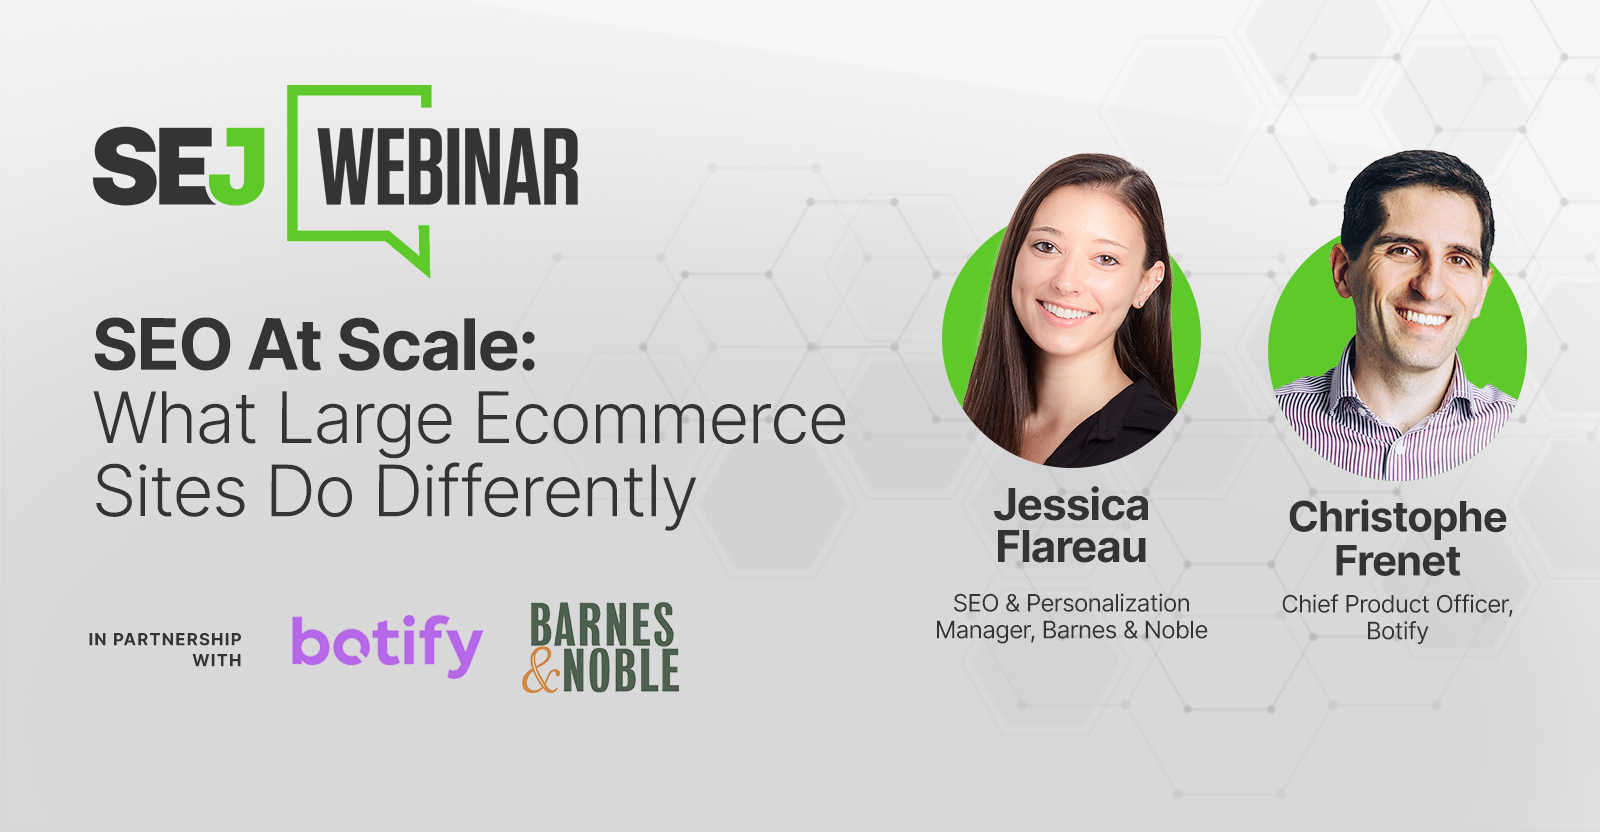 SEO At Scale: What Large Ecommerce Sites Do Differently [Webinar] via @sejournal, @hethr_campbell